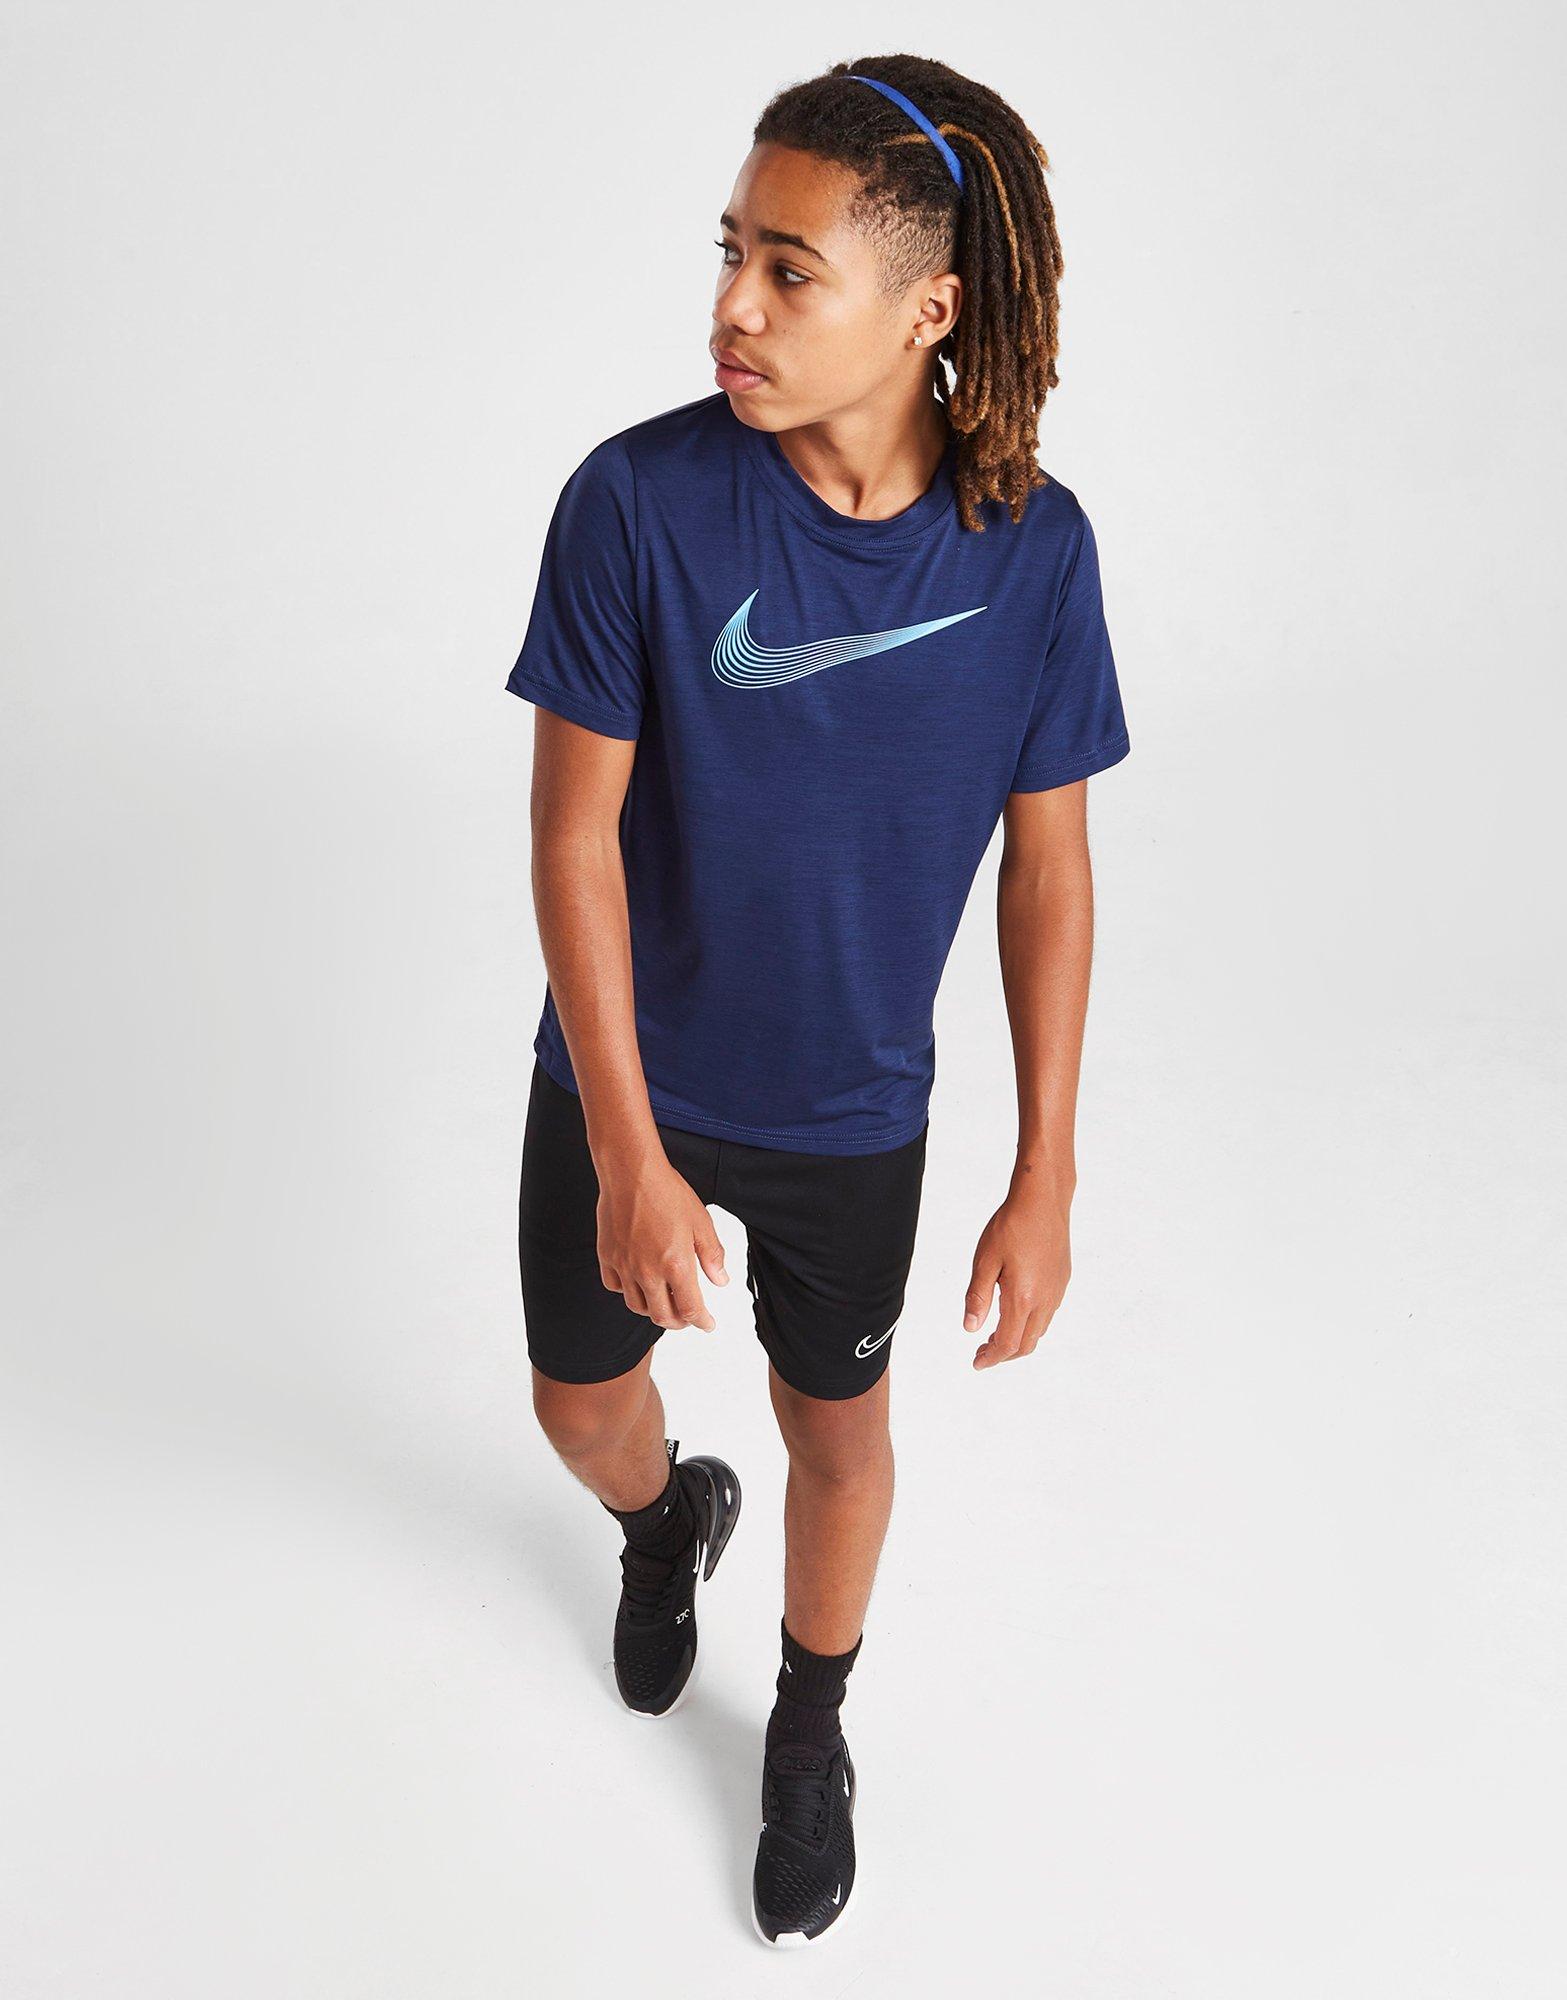 Nike Men's Sportswear Classic Just Do It Graphic T-Shirt in Blue/Midnight Navy Size XS | Cotton/Polyester